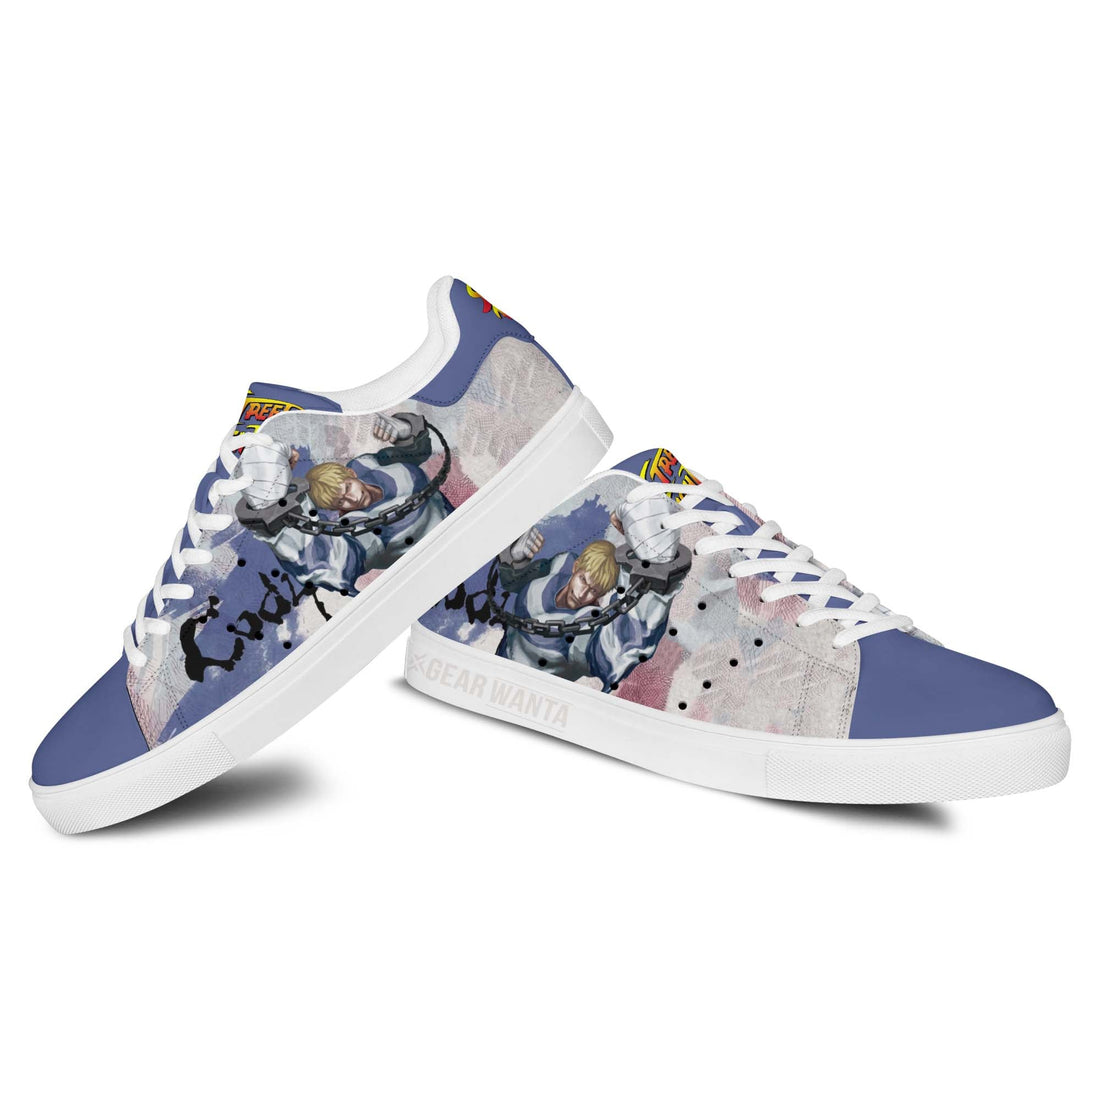 Cody Stan Shoes Custom Street Fighter Game Shoes-Gear Wanta